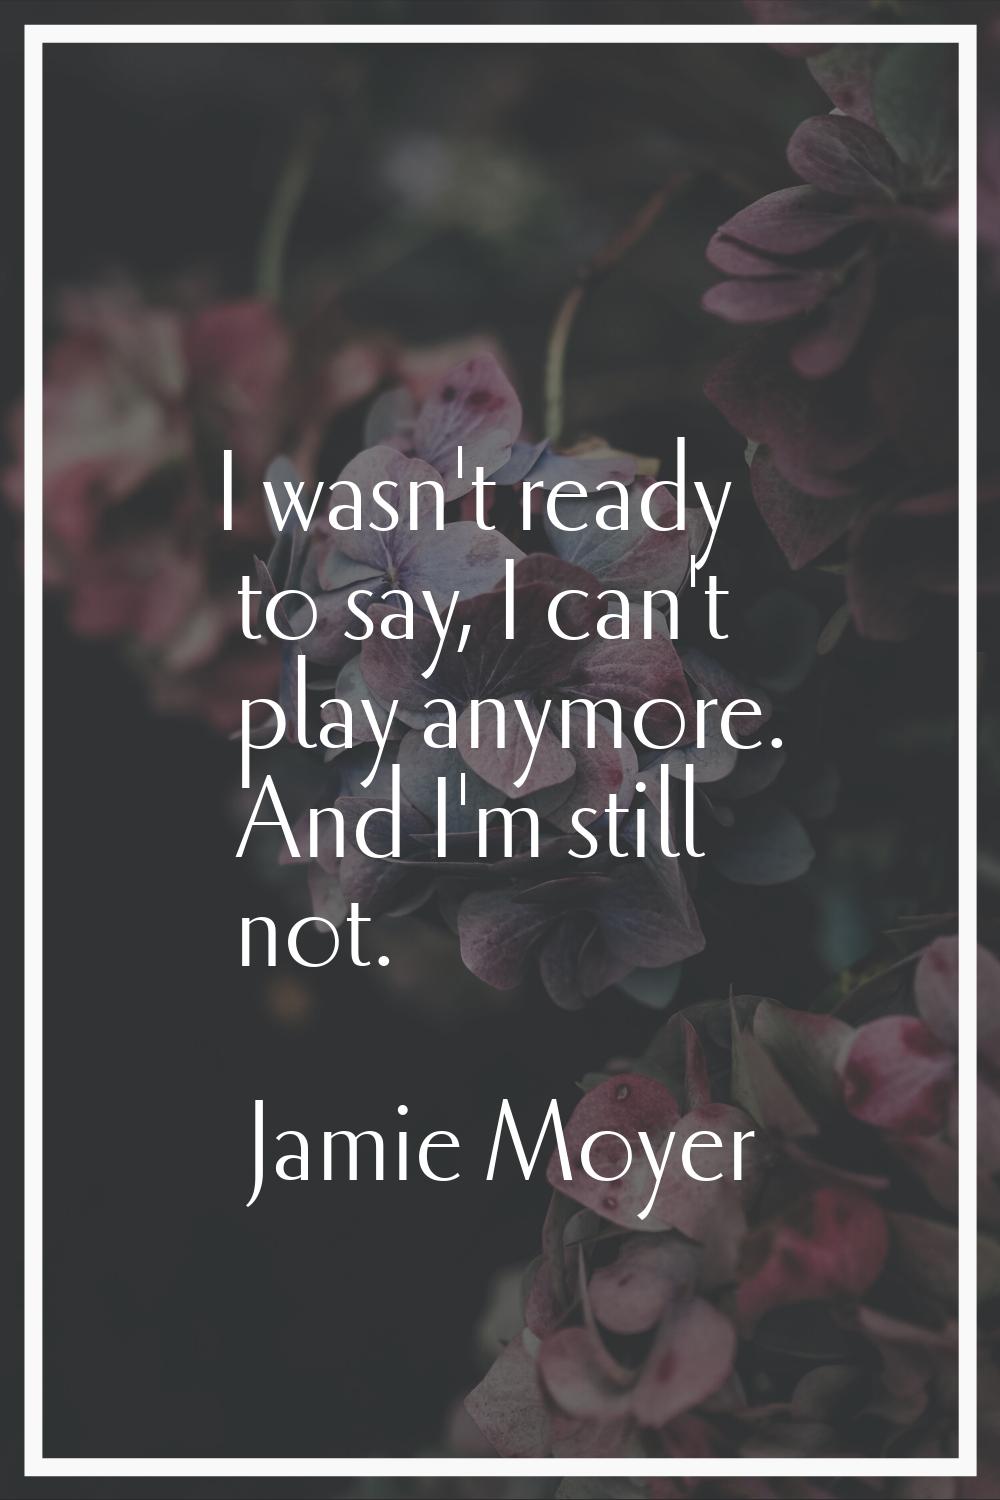 I wasn't ready to say, I can't play anymore. And I'm still not.